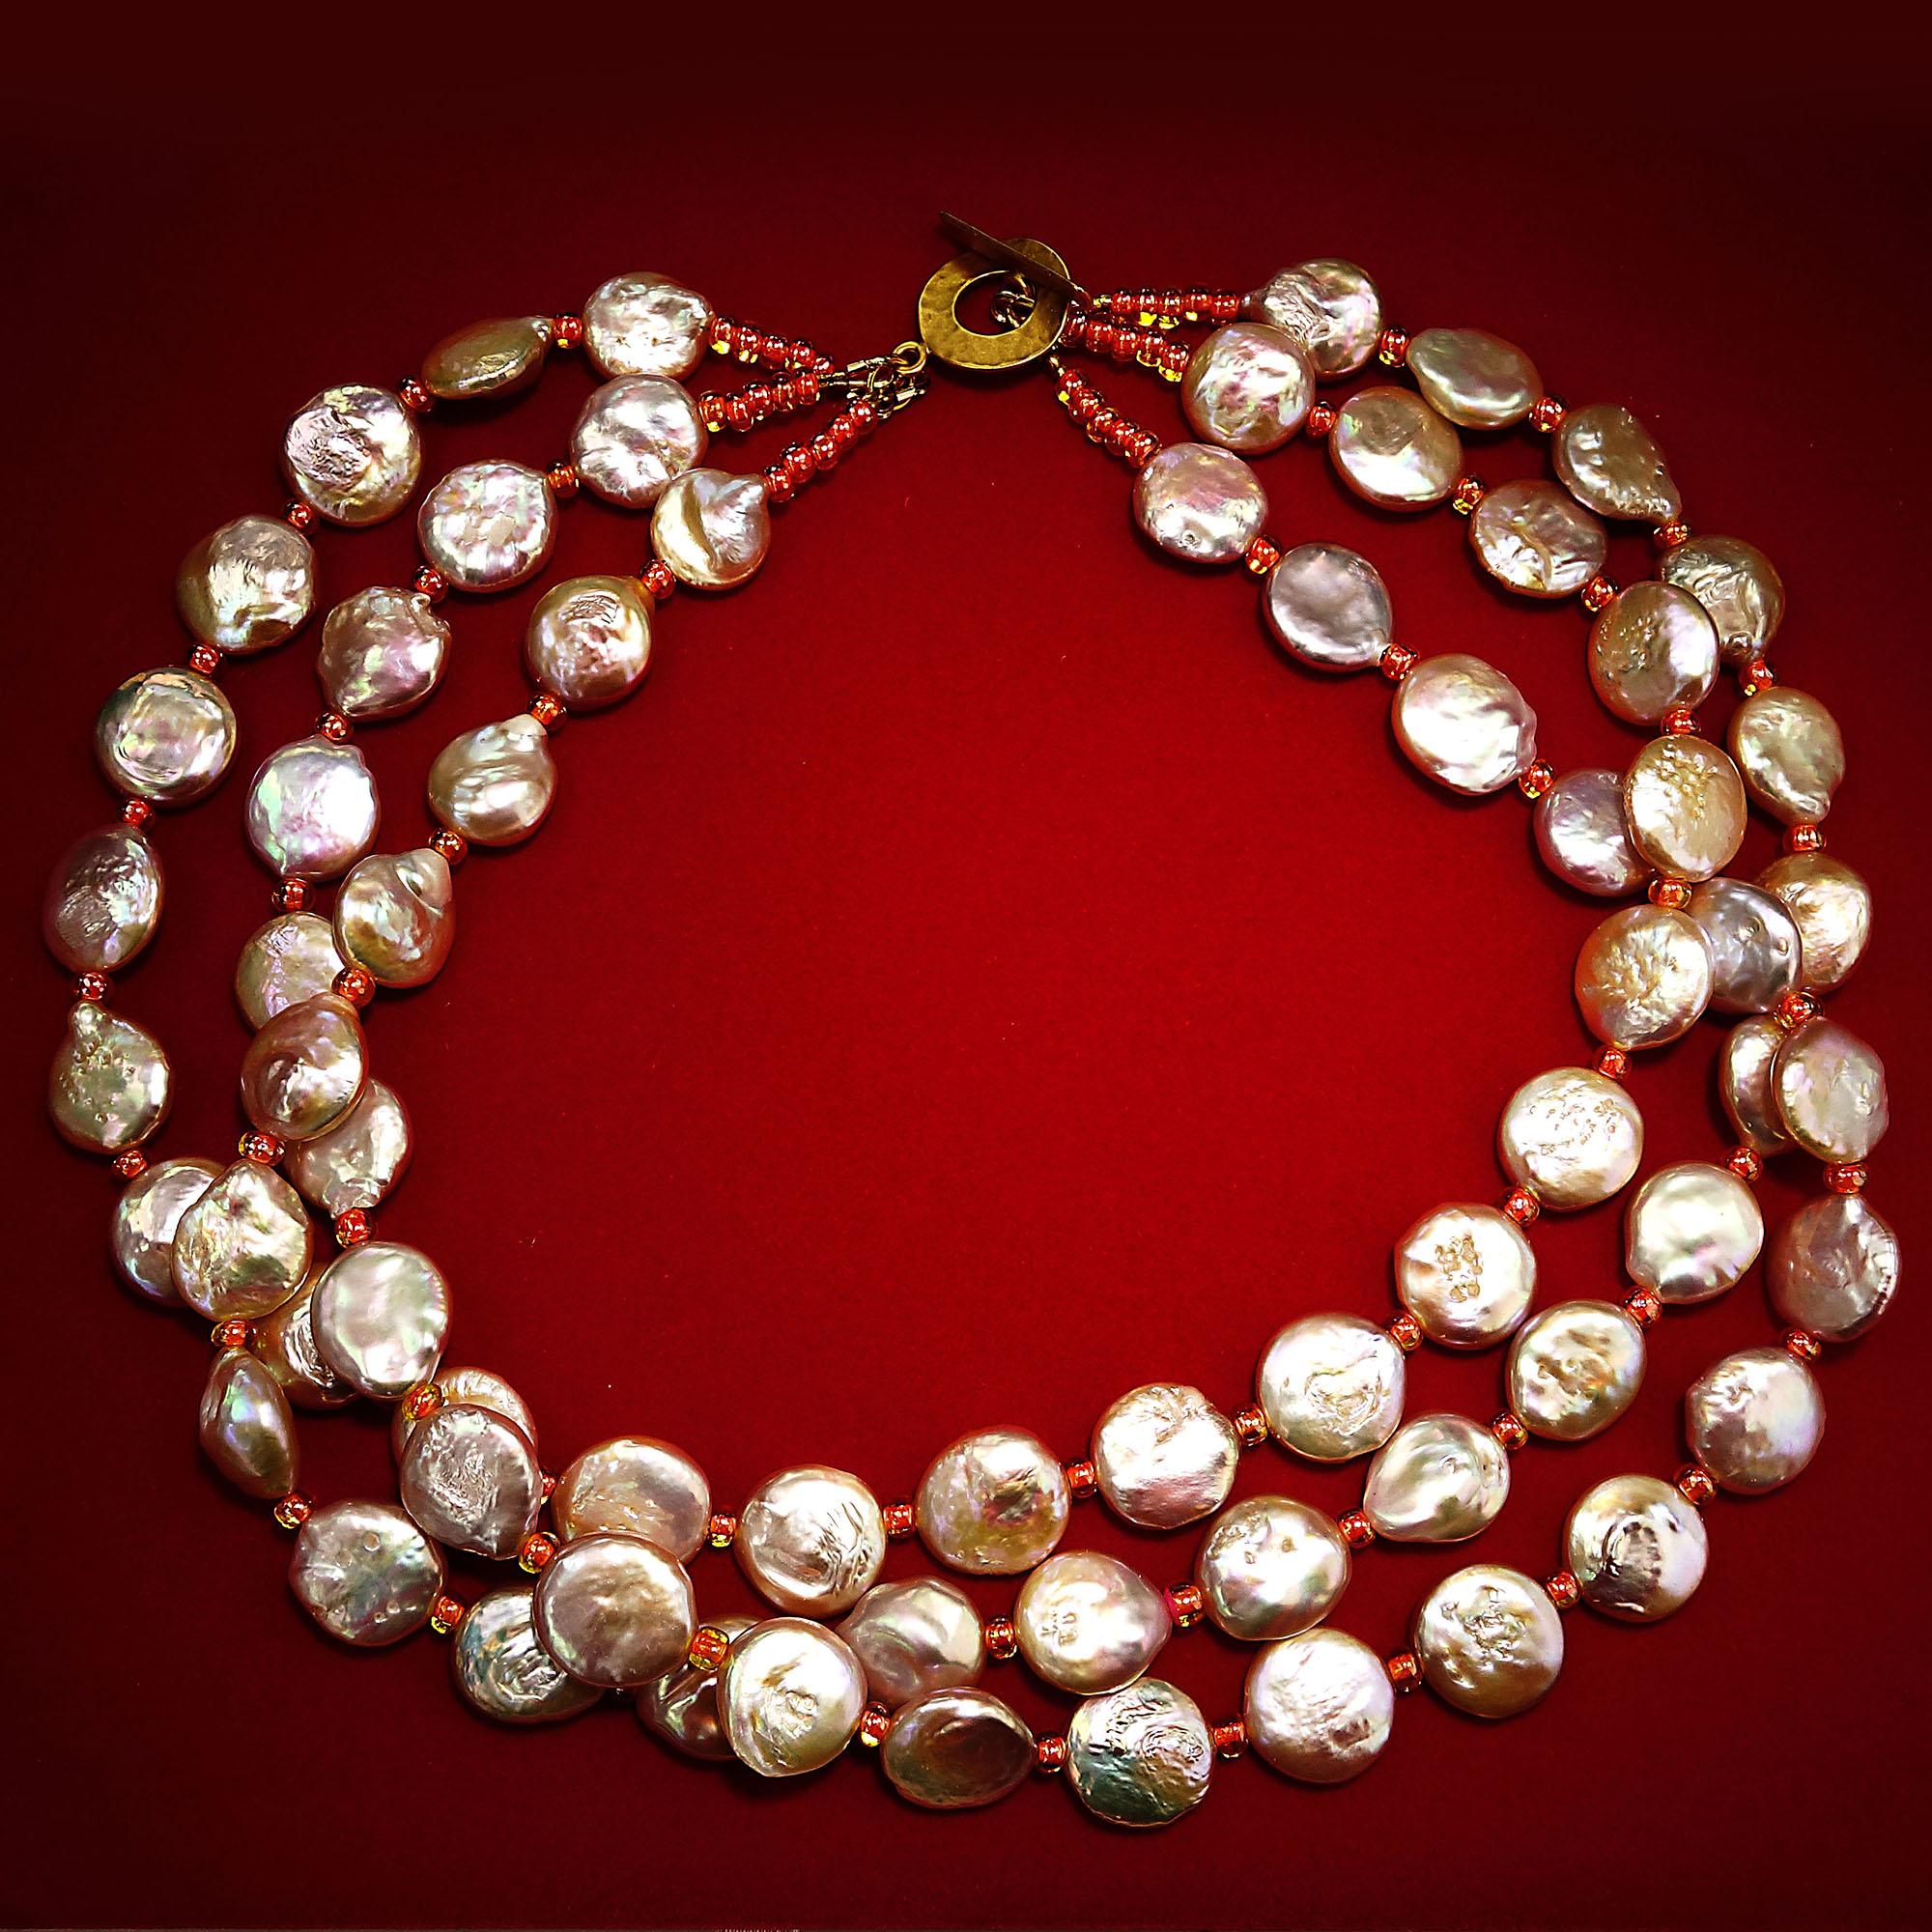 Women's AJD Triple Strand Coin Pearl Necklace in Peachy/Pink June Birthstone  Great Gift